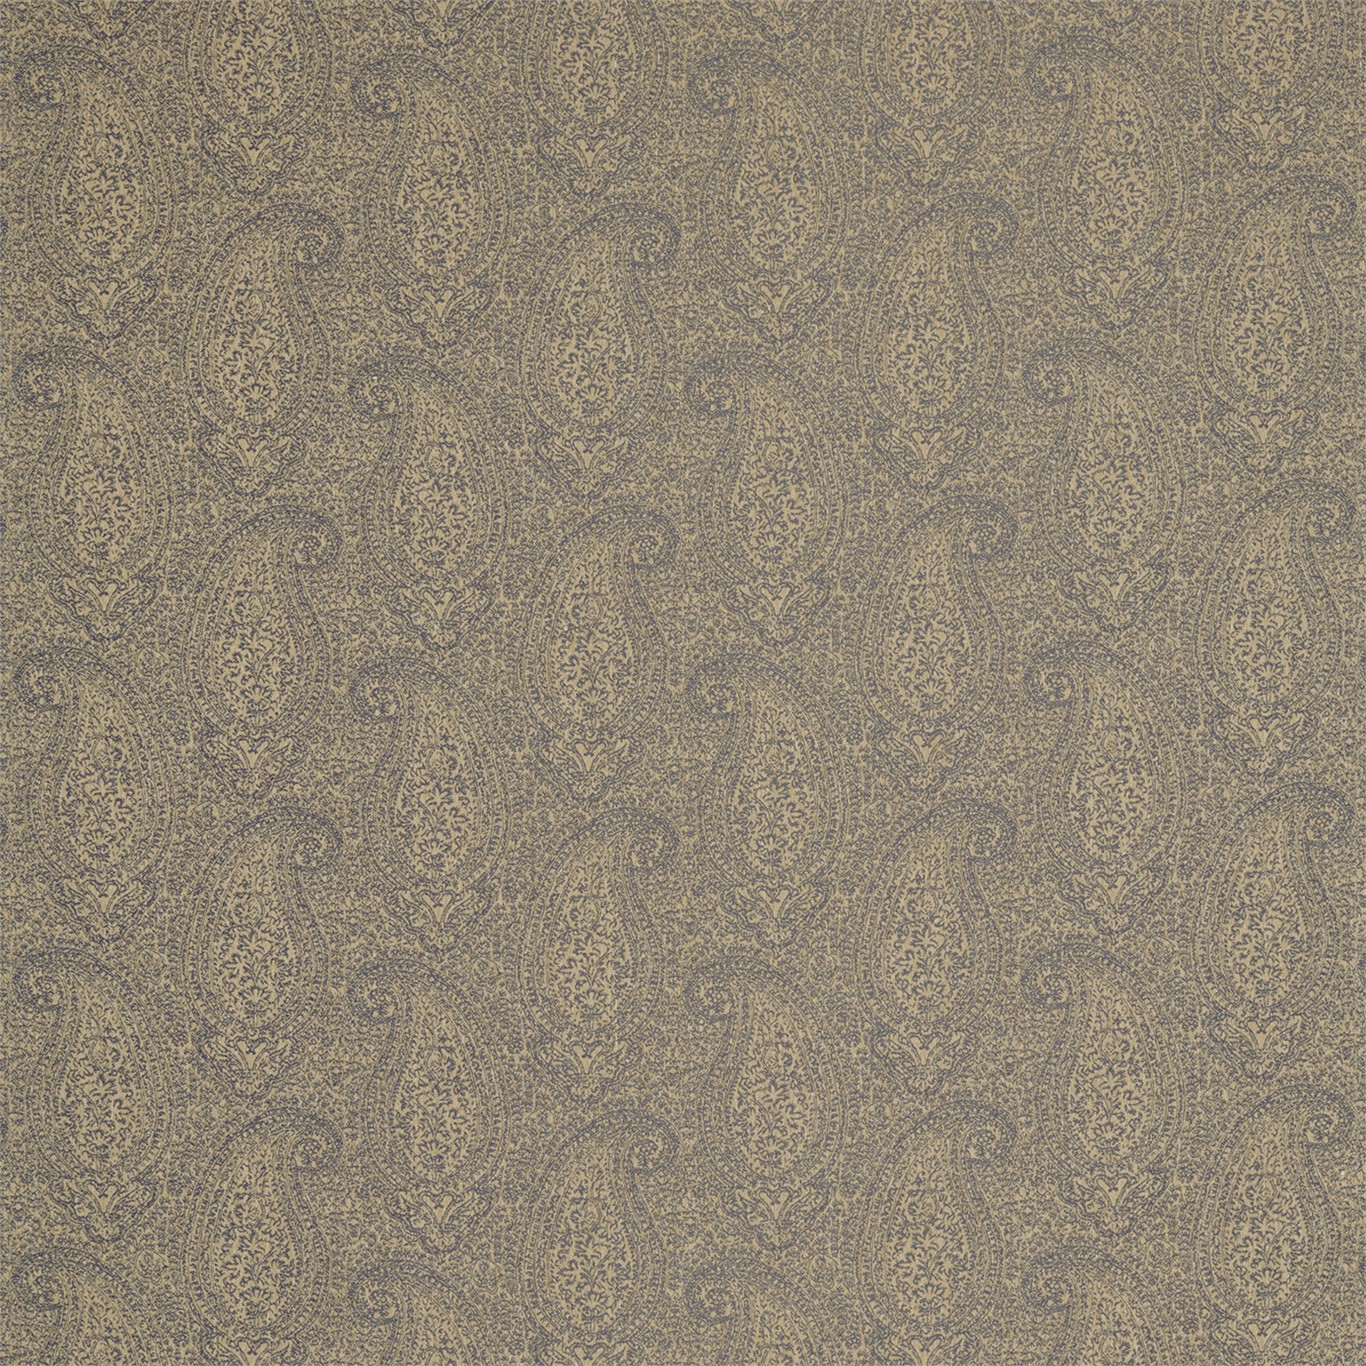 Cleadon Antique Bronze Fabric by ZOF